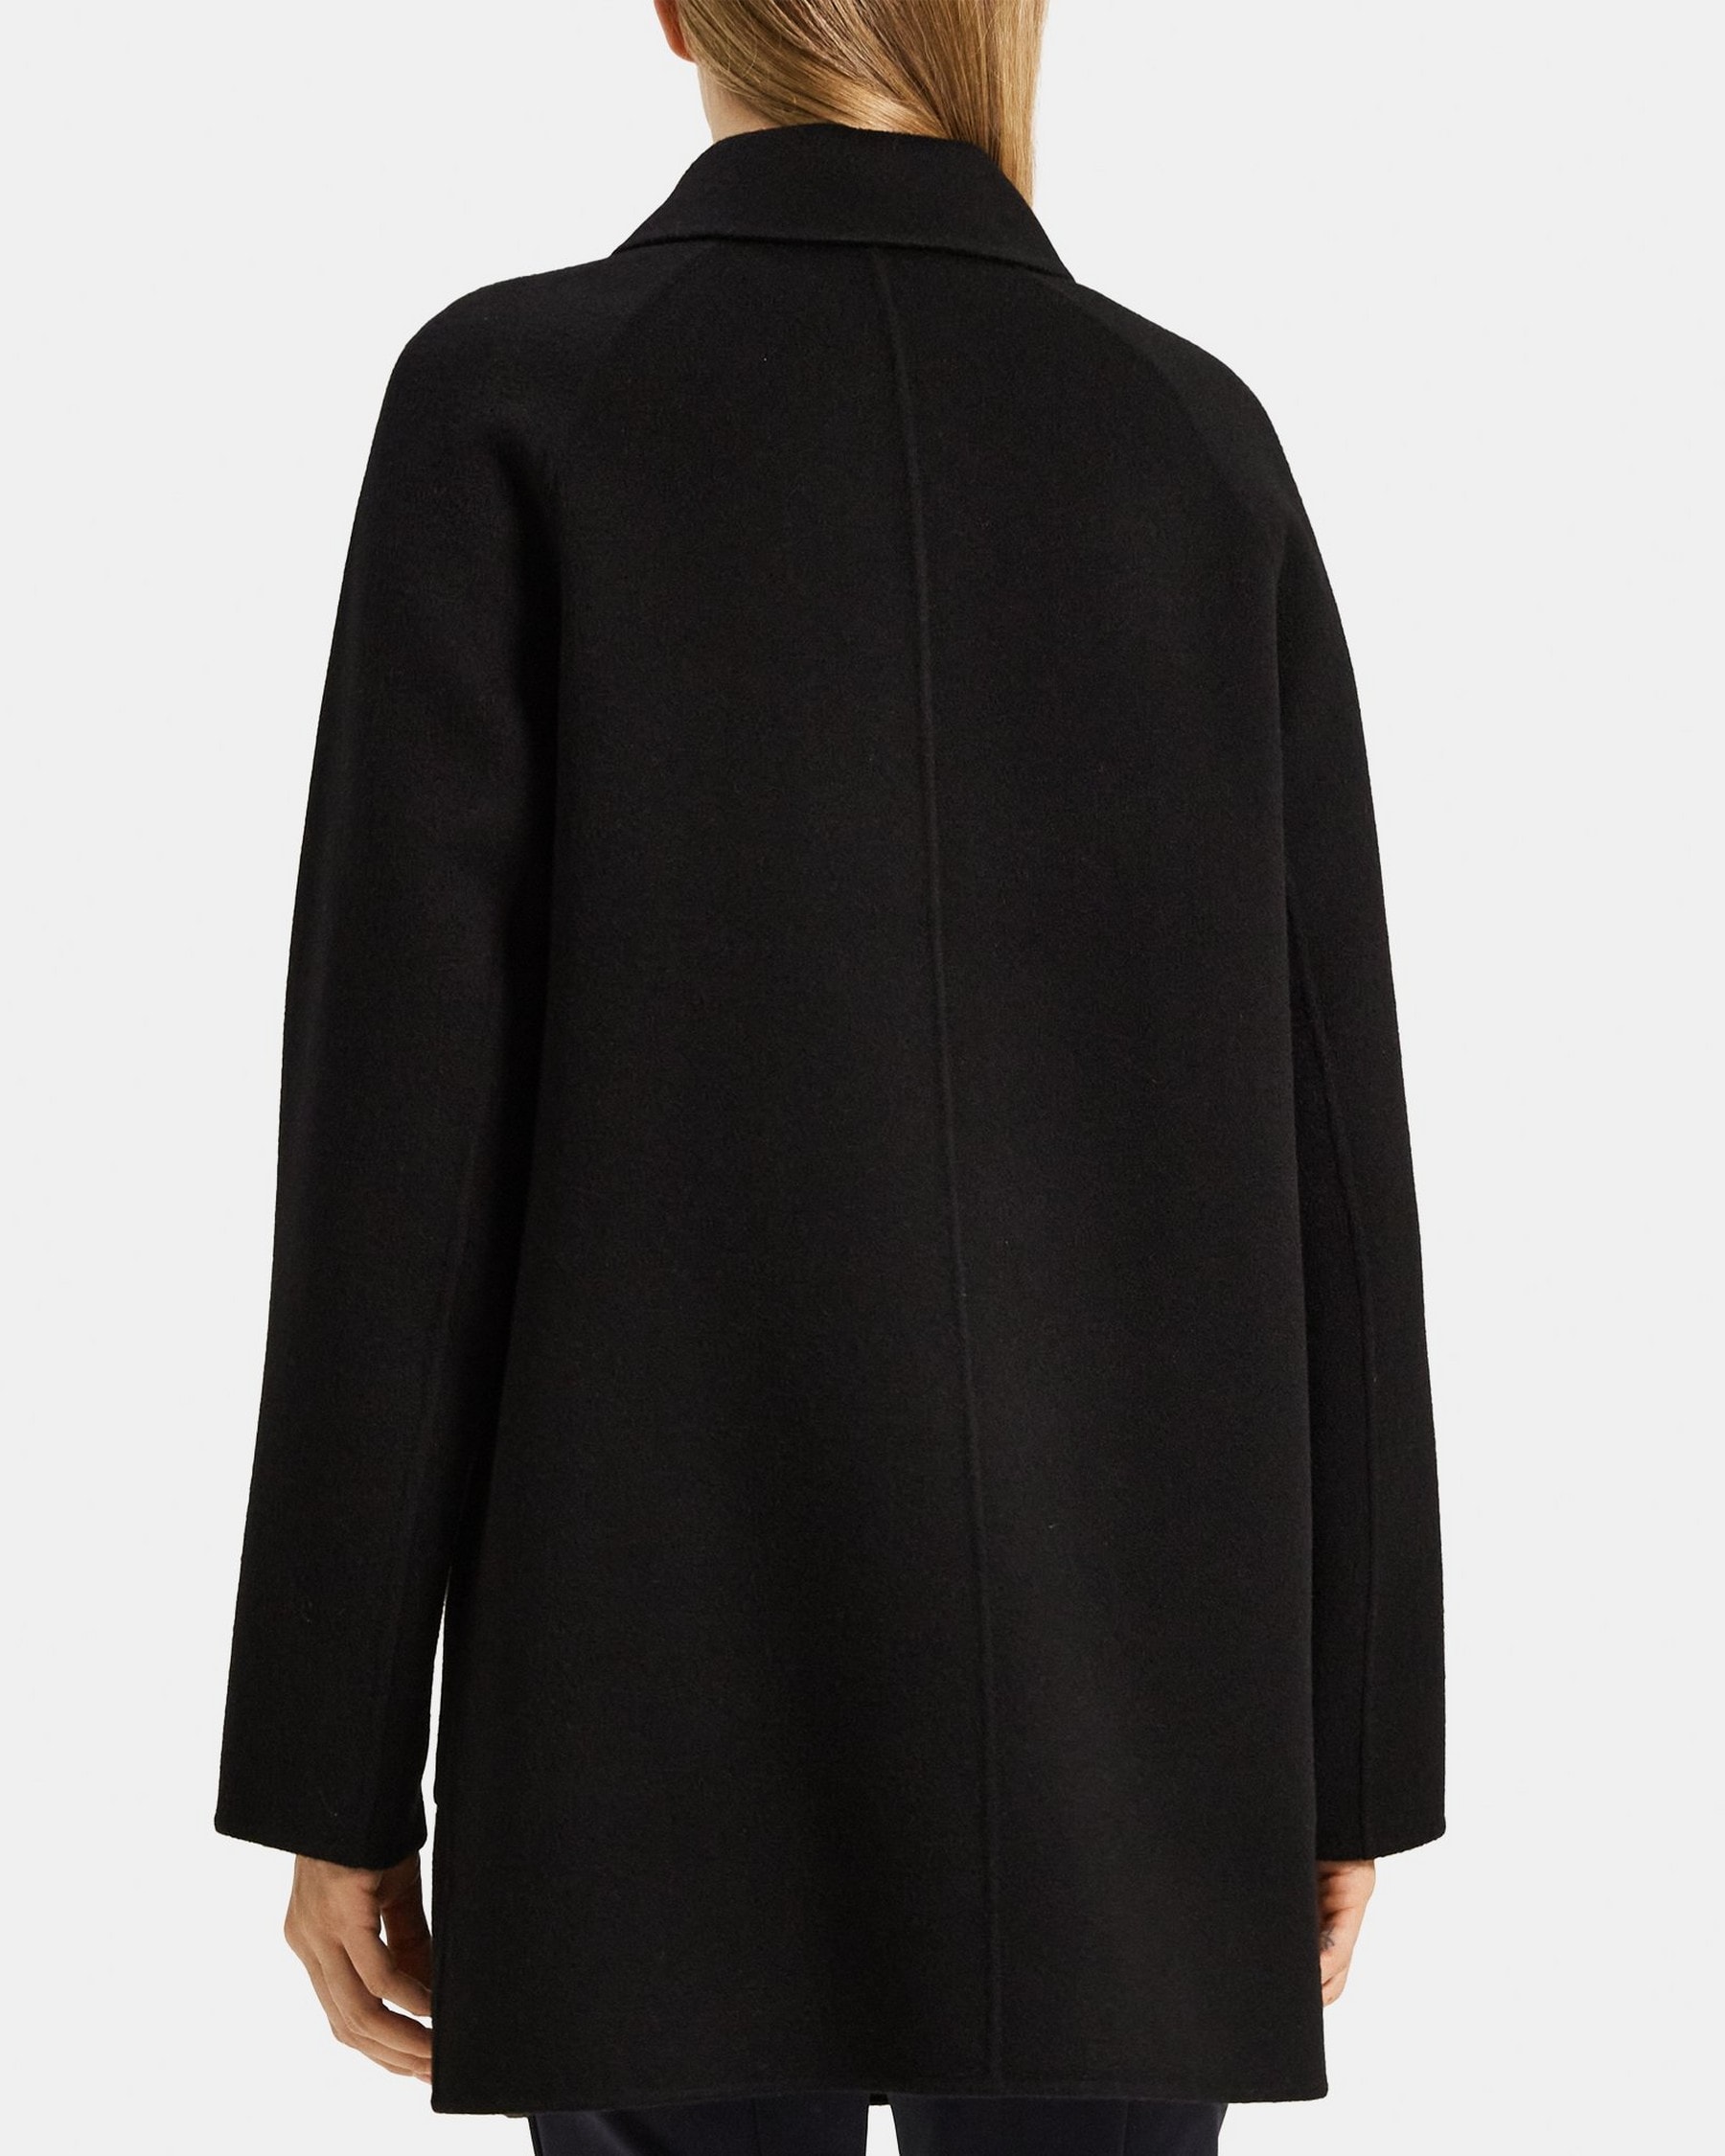 Relaxed Coat in Double-Face Wool-Cashmere